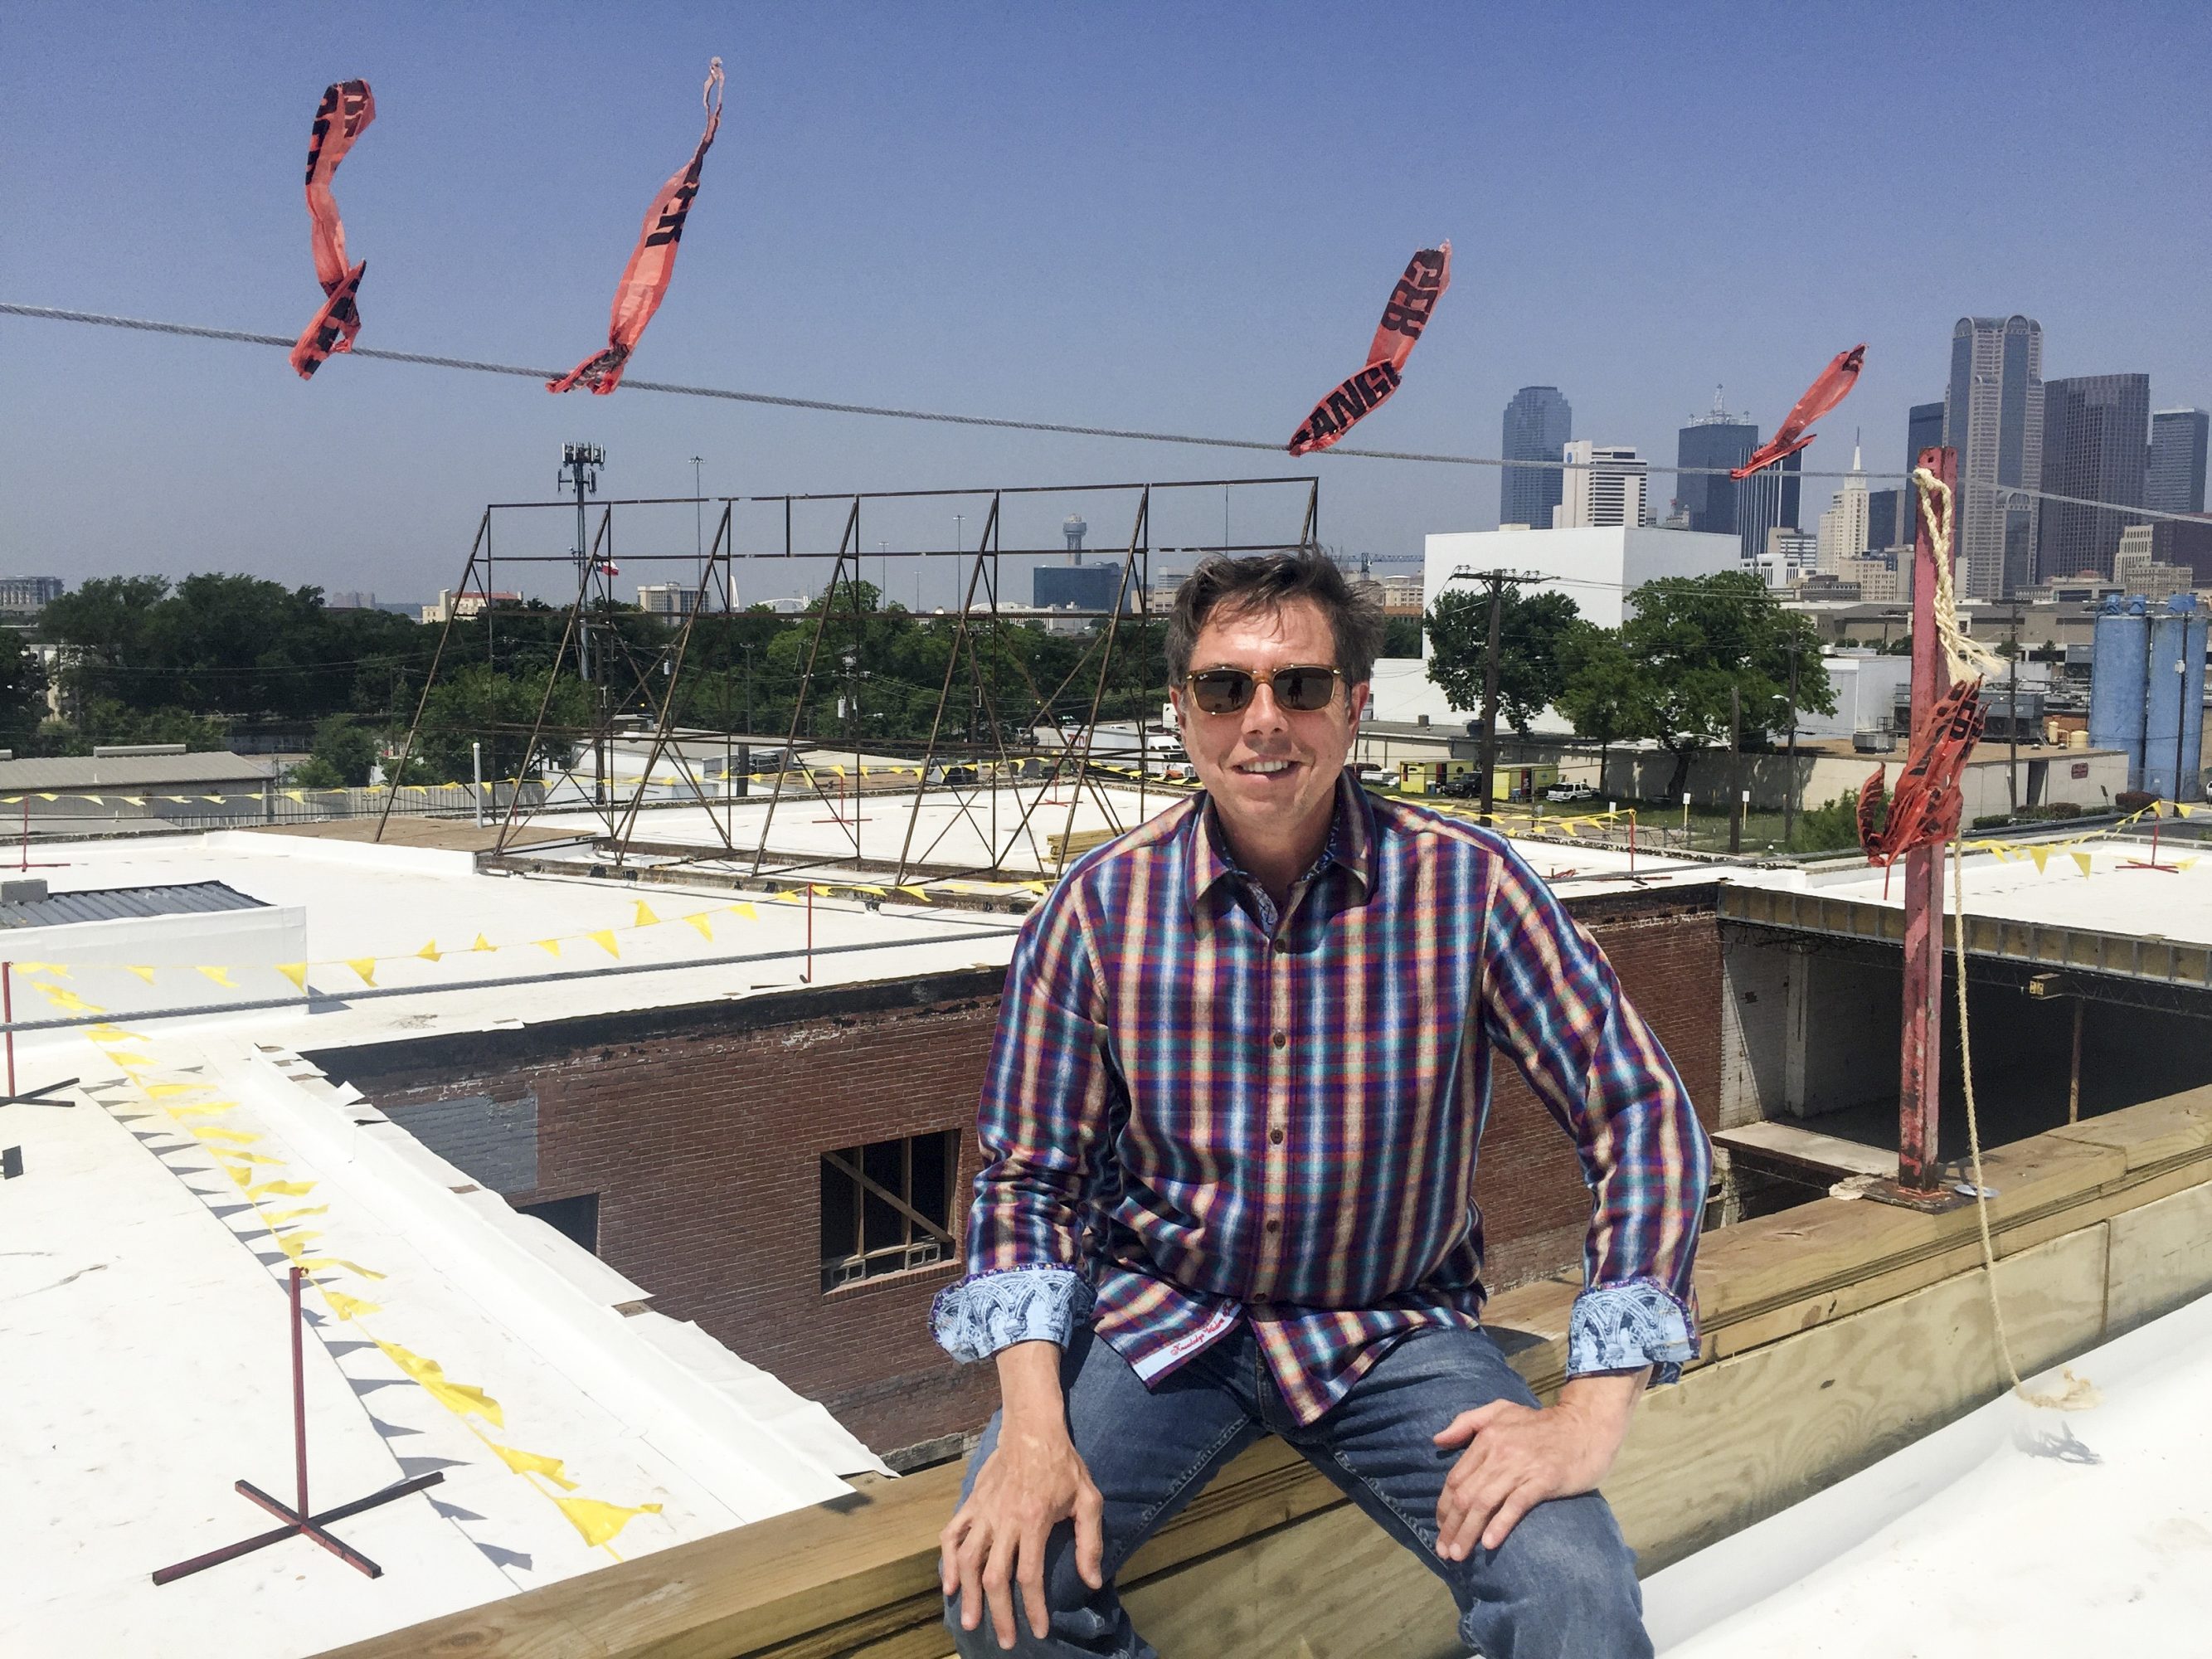 Architect Gary Gene Olp has been working on the 1808 project.